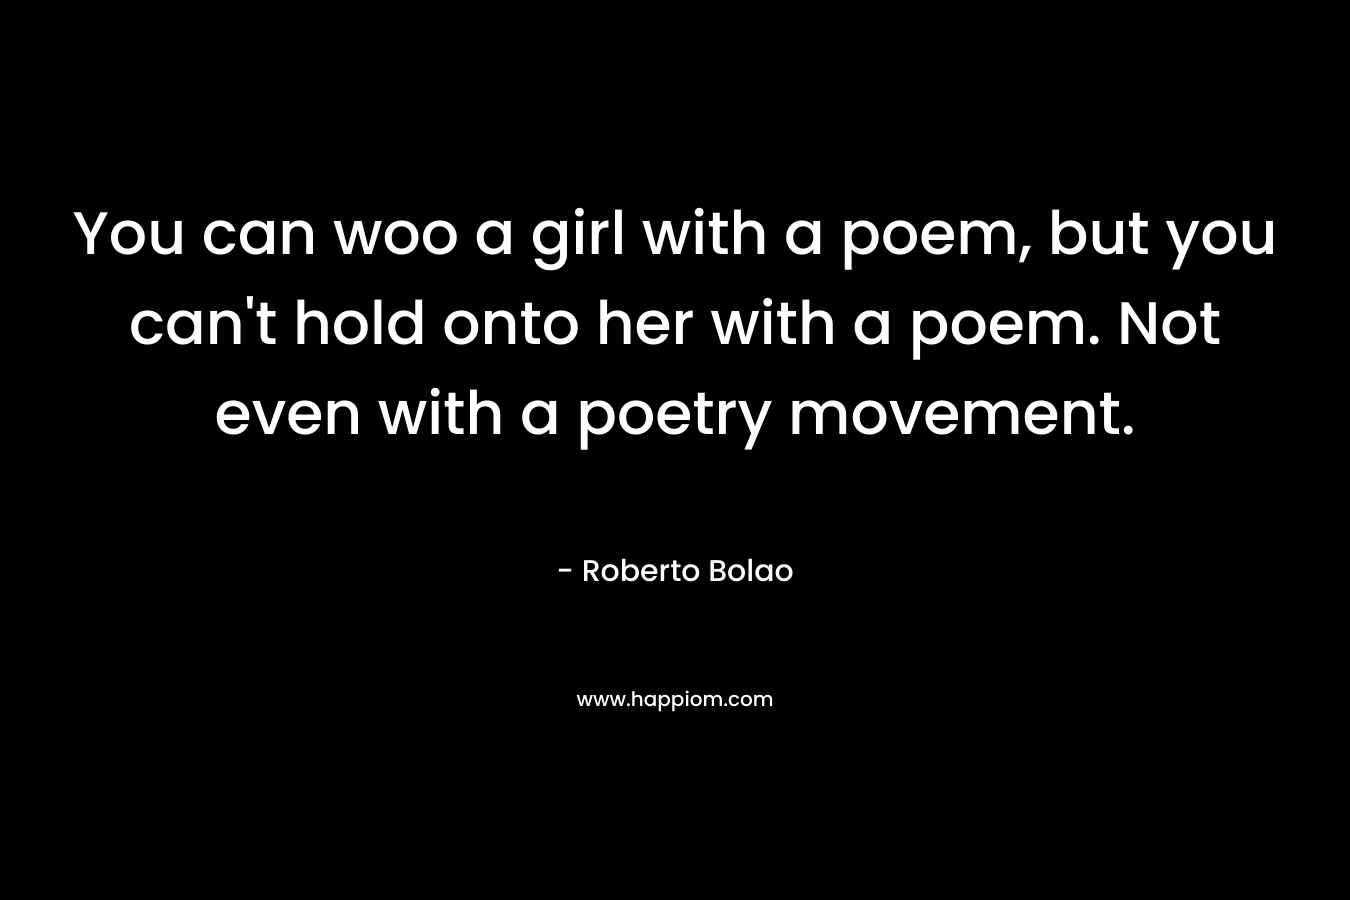 You can woo a girl with a poem, but you can't hold onto her with a poem. Not even with a poetry movement.